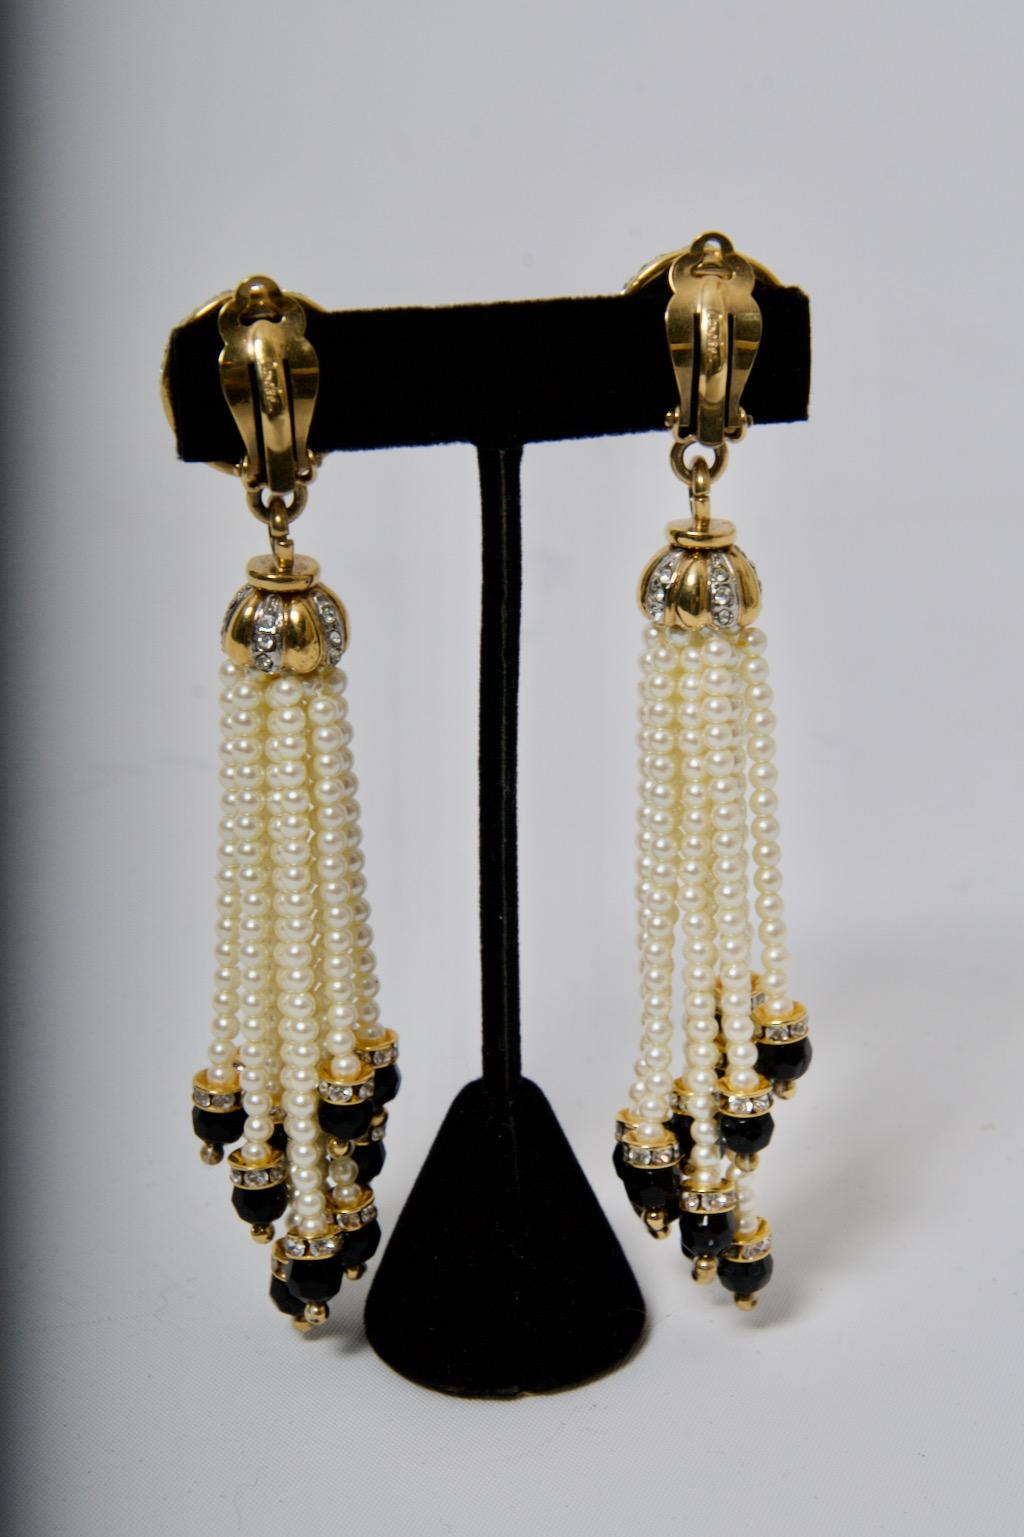 Dramatic, long Carolee clip-on chandelier earrings, the domed earpieces with pave rhinestones suspending by links a gold metal lobed crown capping twelve strands of small pearls, the strands of varying lengths. Each strand terminates with a